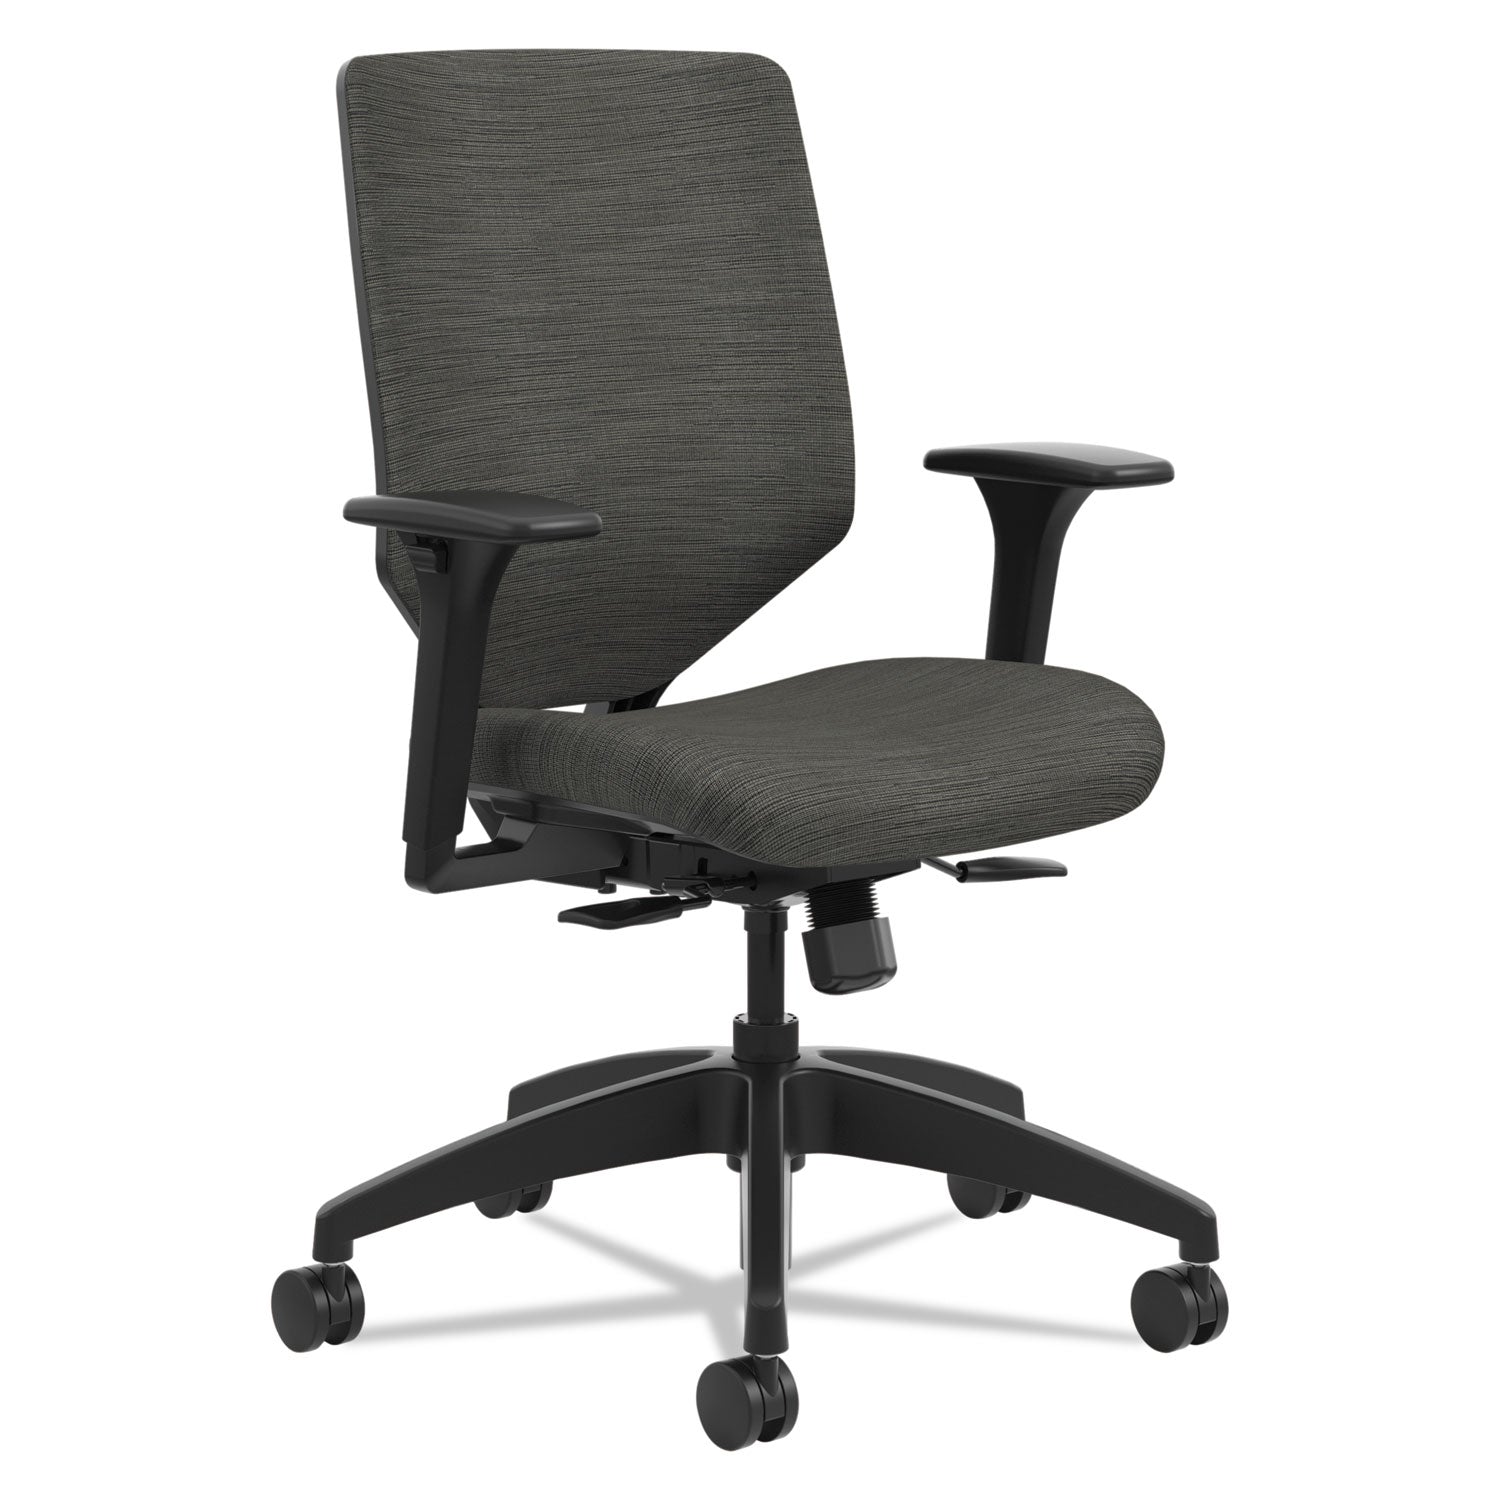 solve-series-upholstered-back-task-chair-supports-up-to-300-lb-17-to-22-seat-height-ink-seat-back-black-base_honsvu1aclc10tk - 1